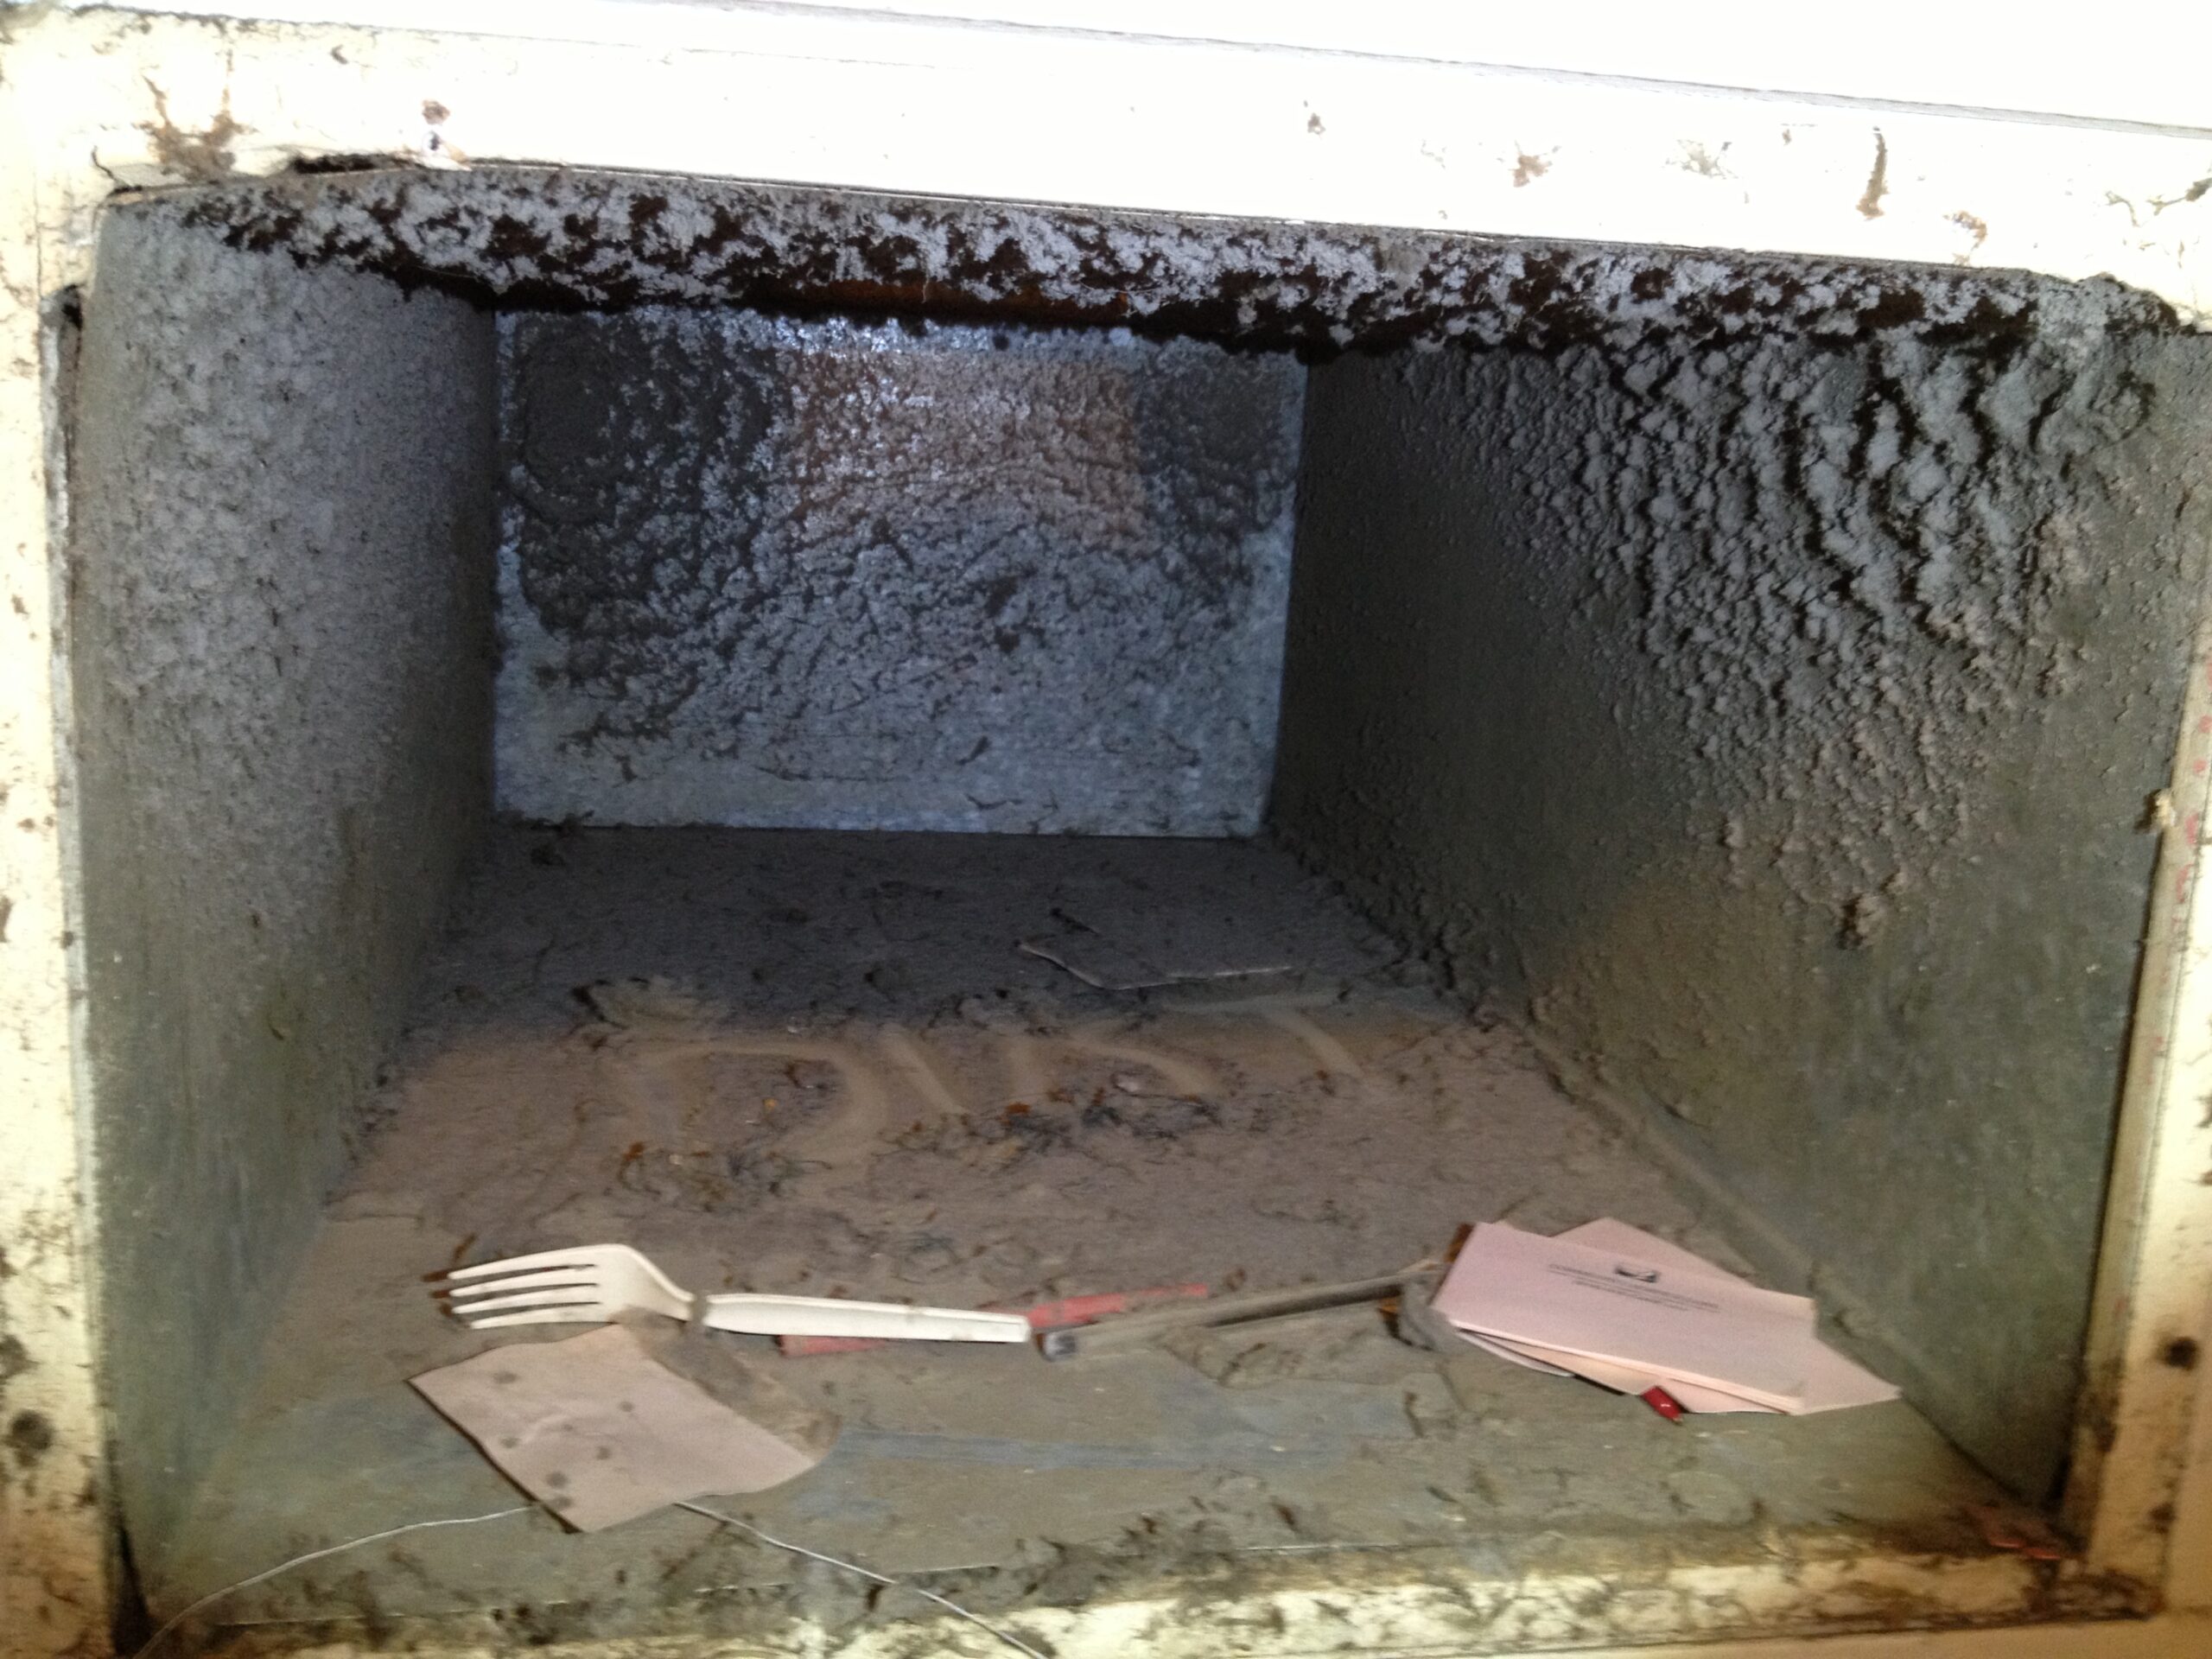 A/C Return Intake box before it has been cleaned by A-1 Duct Cleaning & Chimney Sweep in Orange County, CA